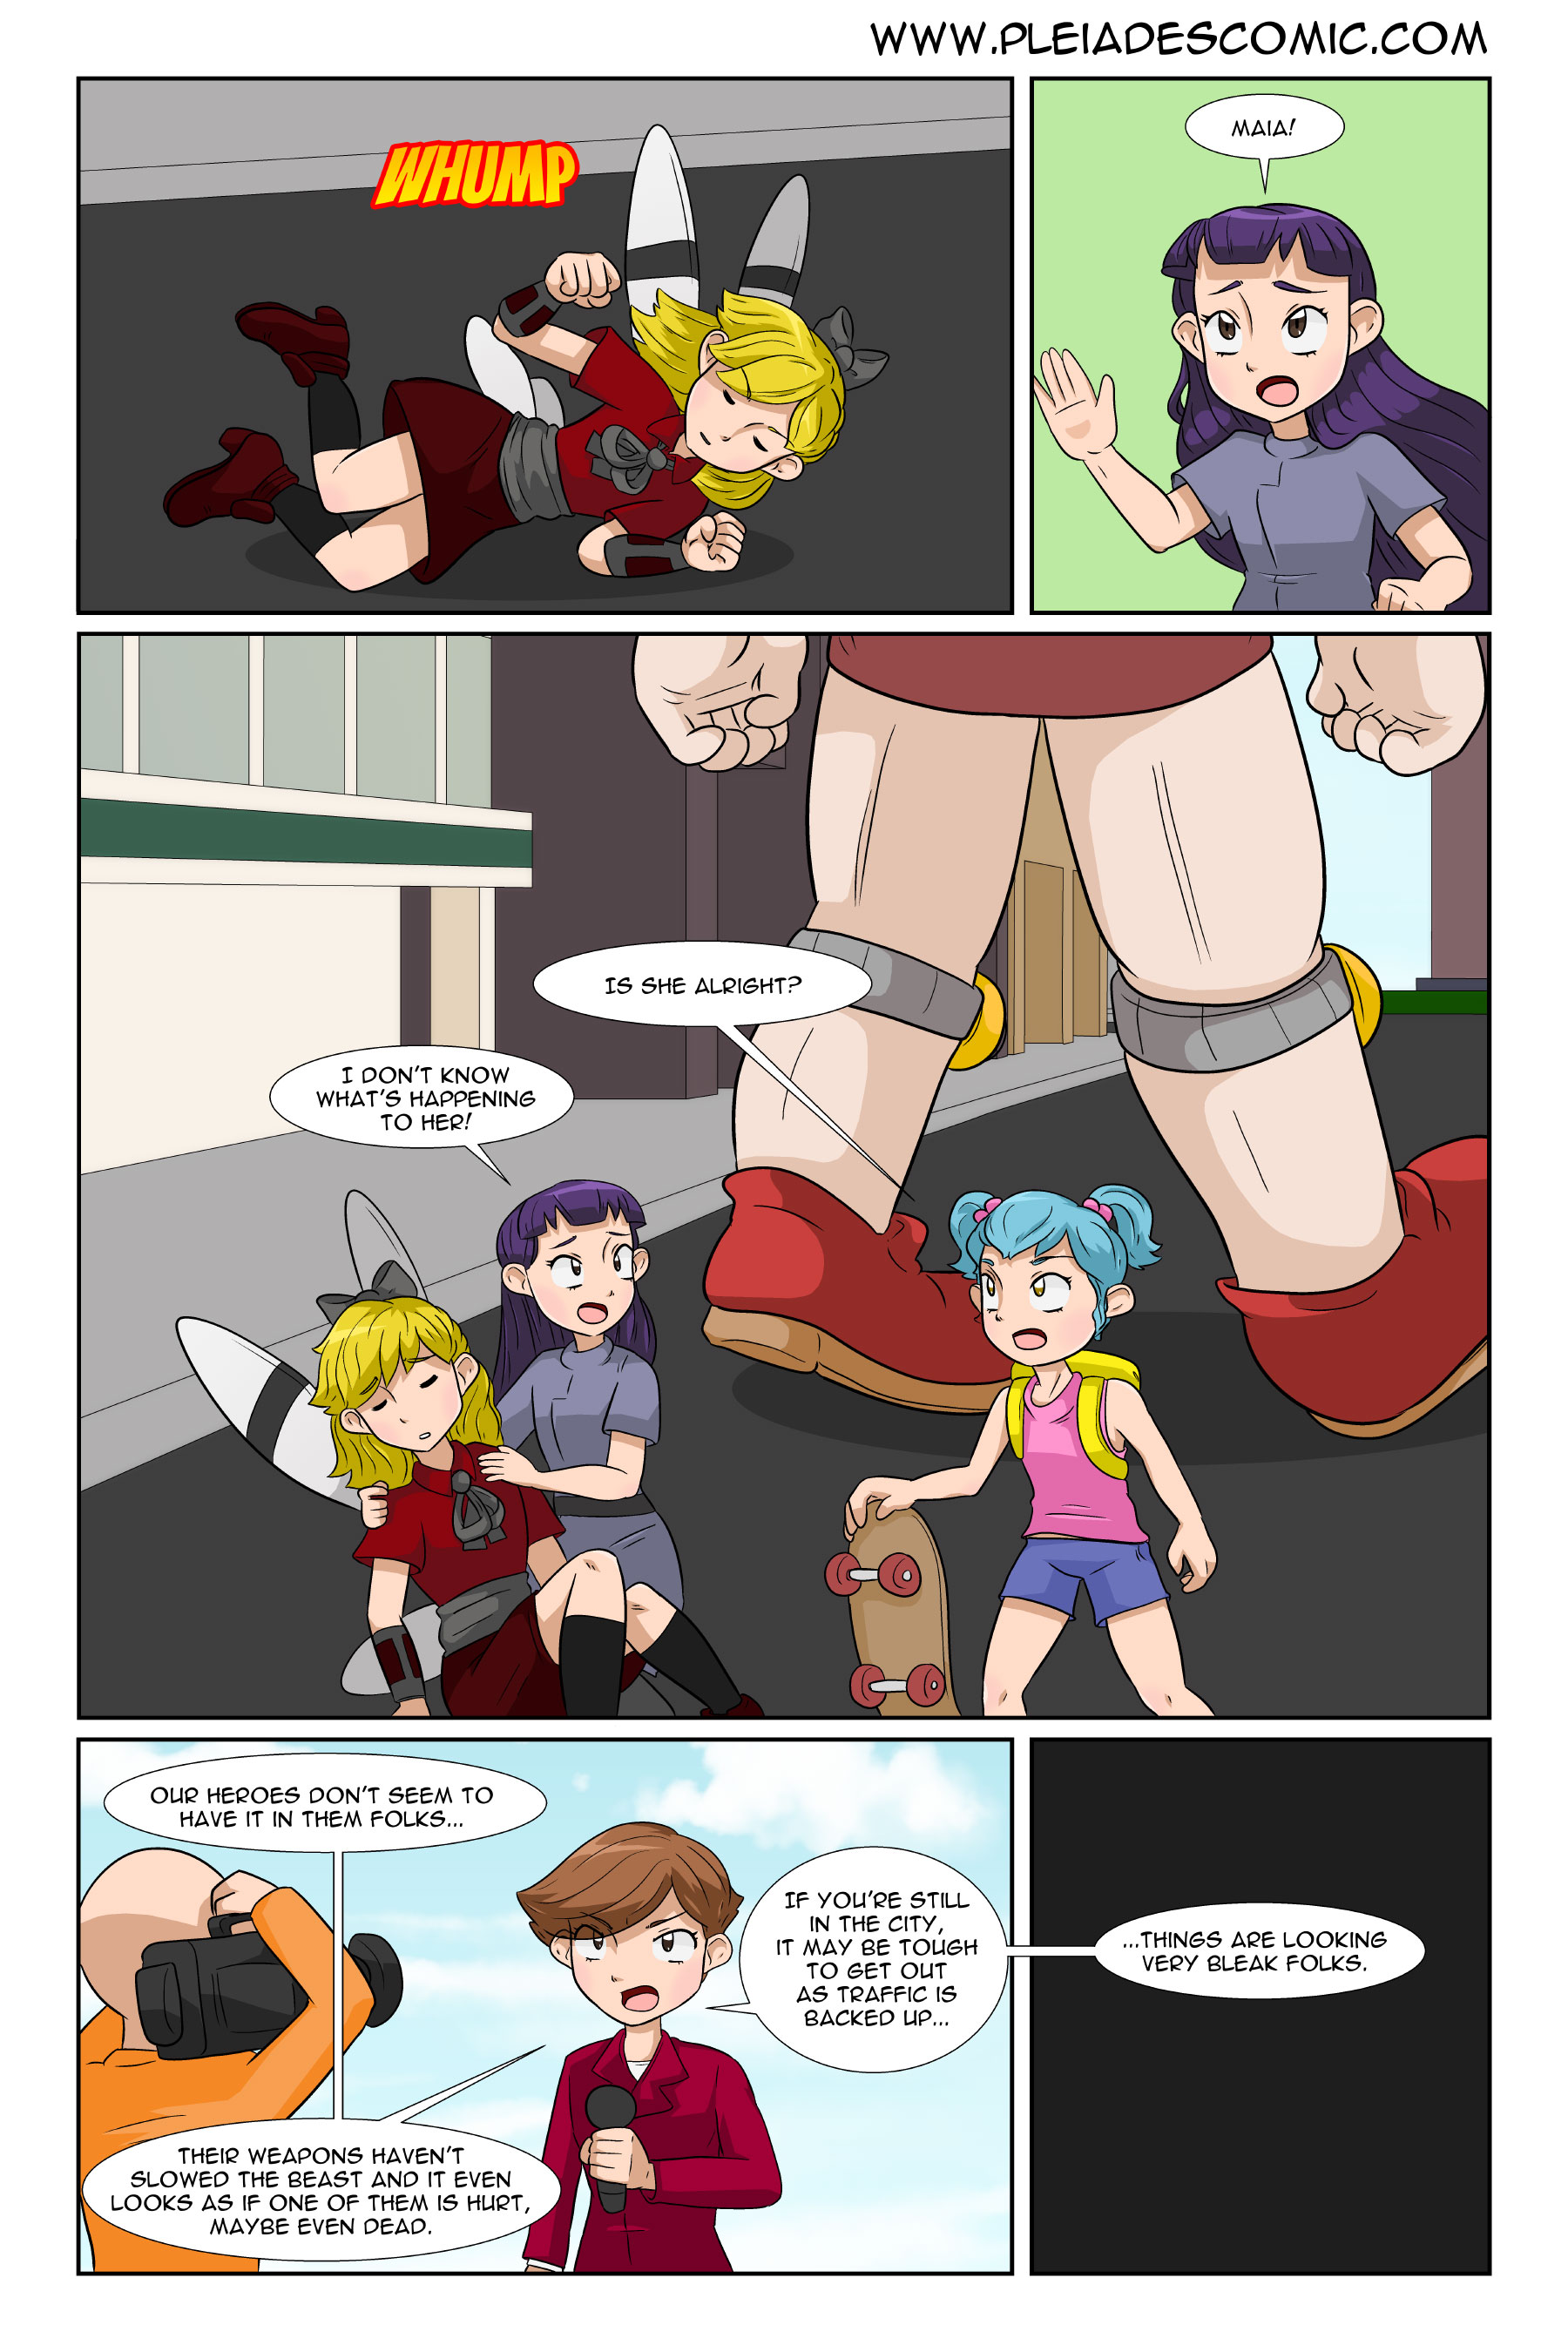 Episode 3: Wrath of the Cyclops – Page 21